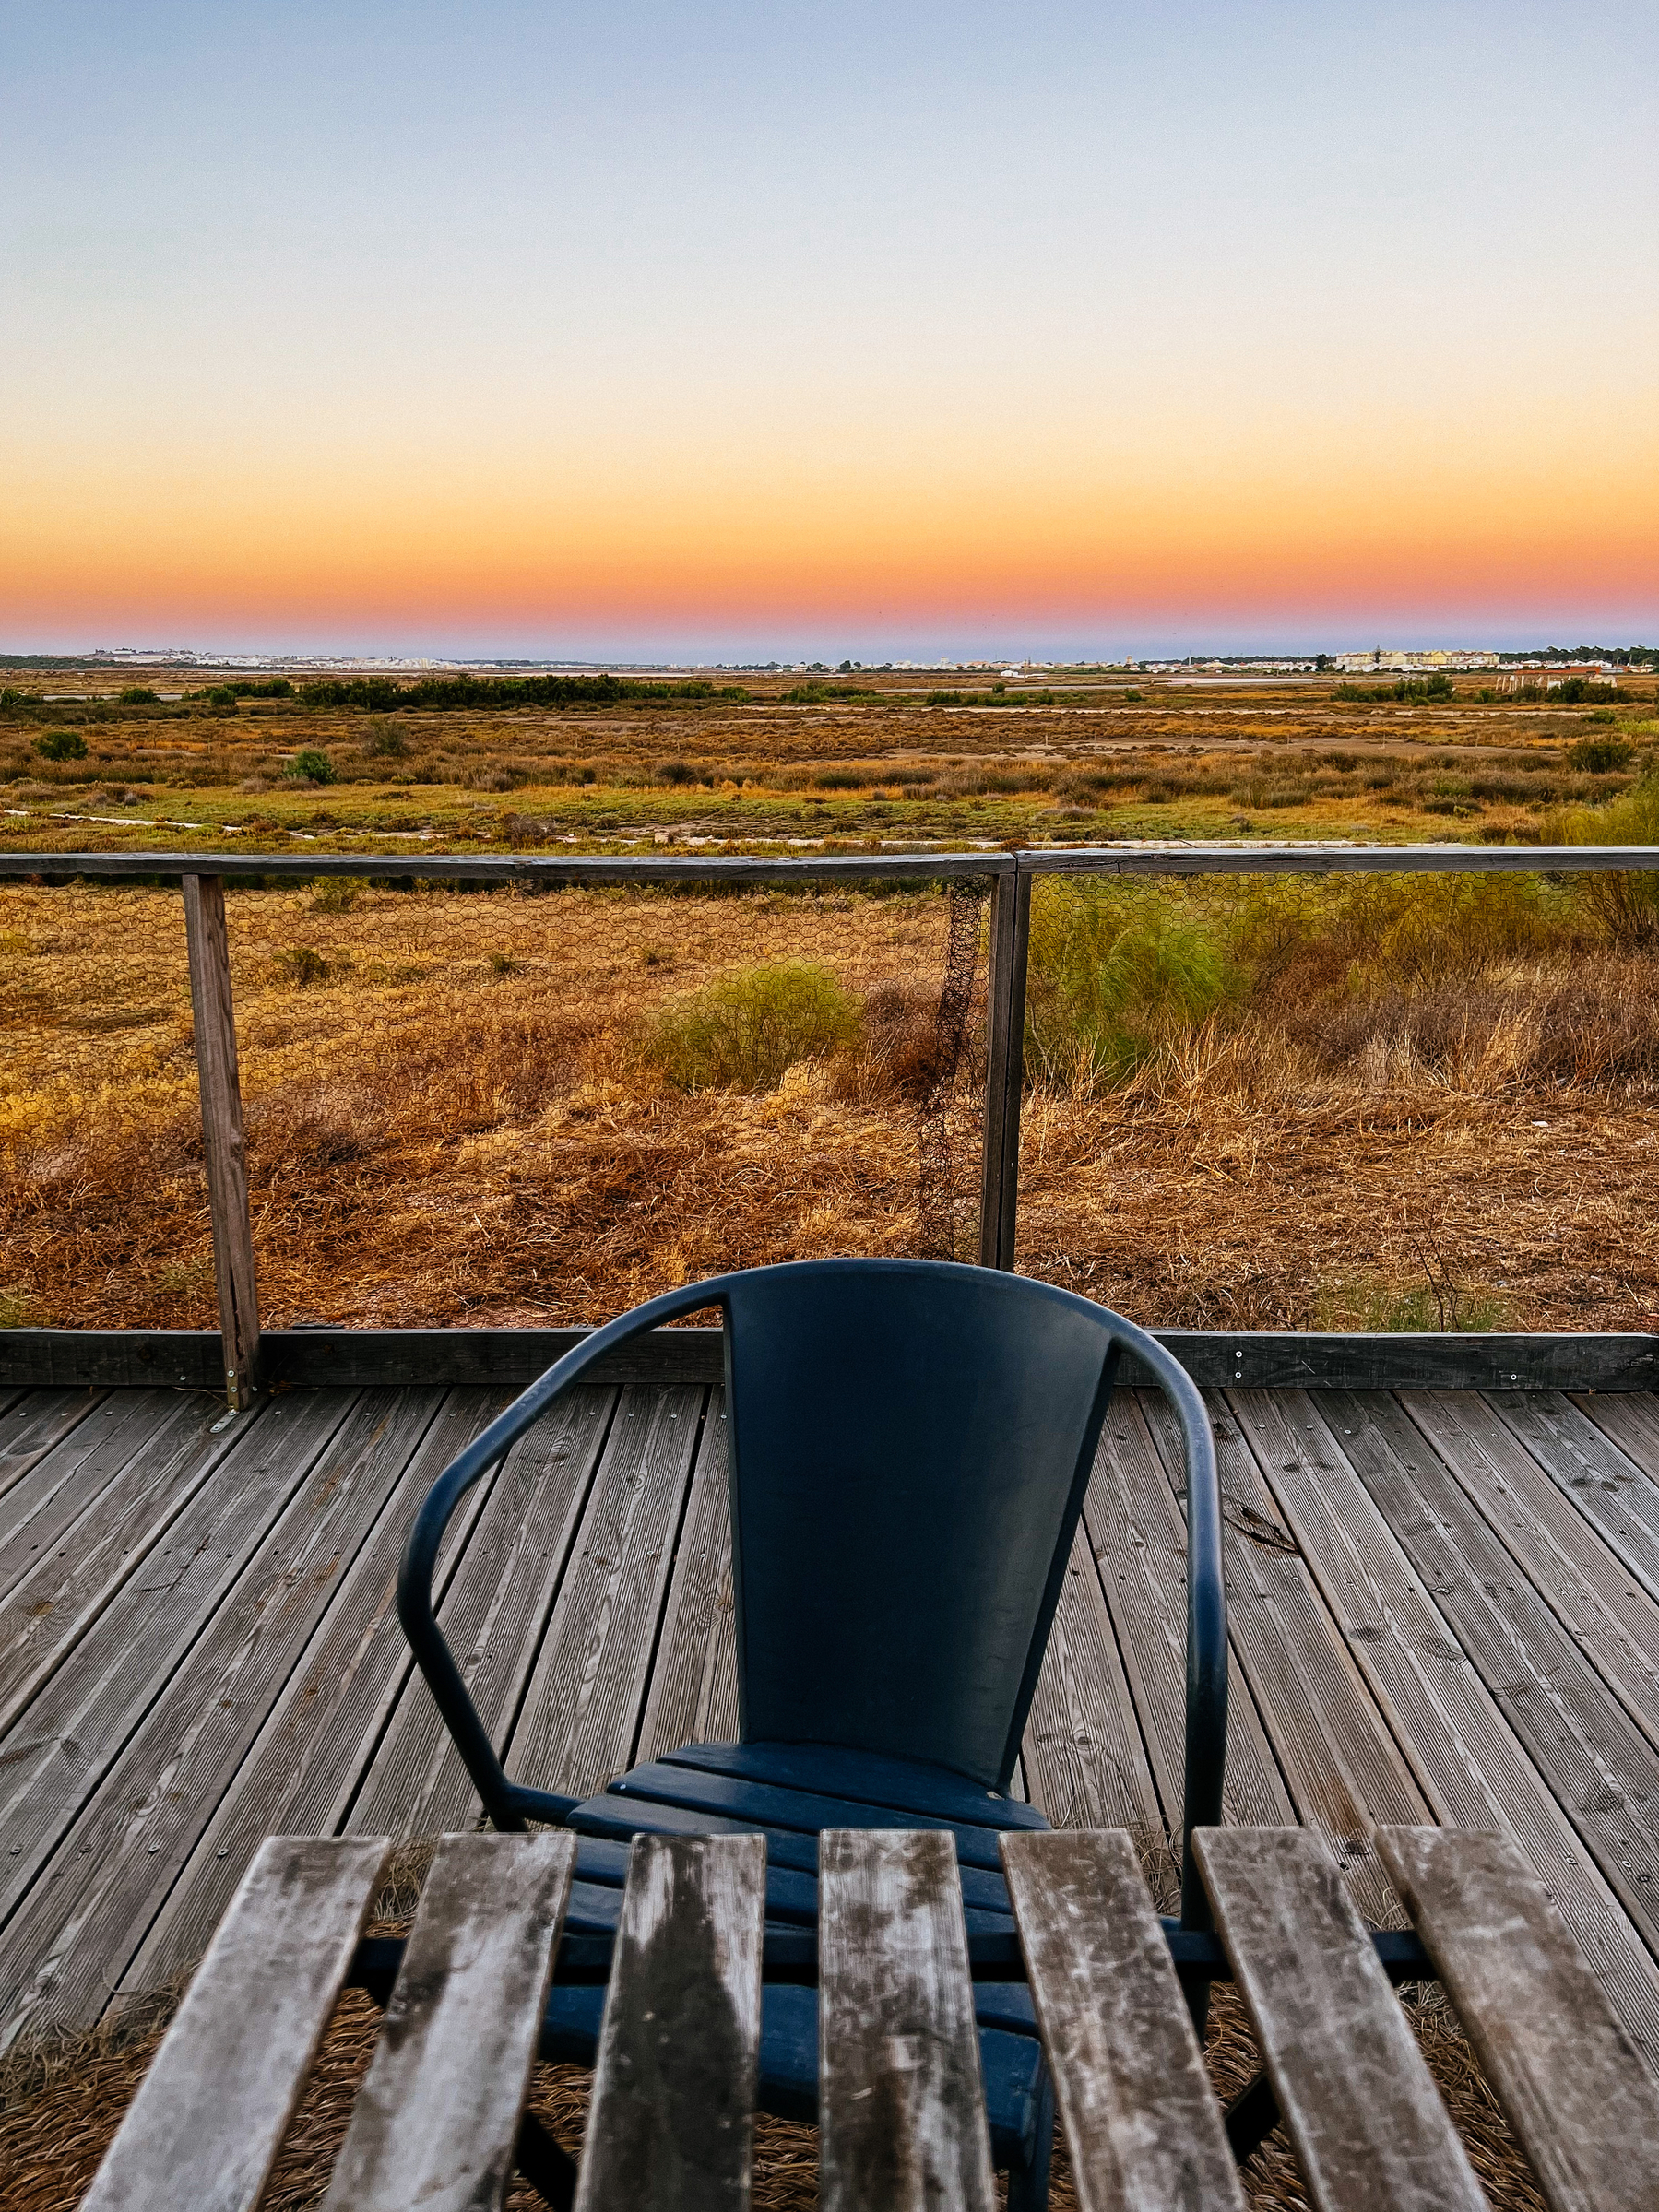 a chair and a table, during sunset. Empty landscape in the background.